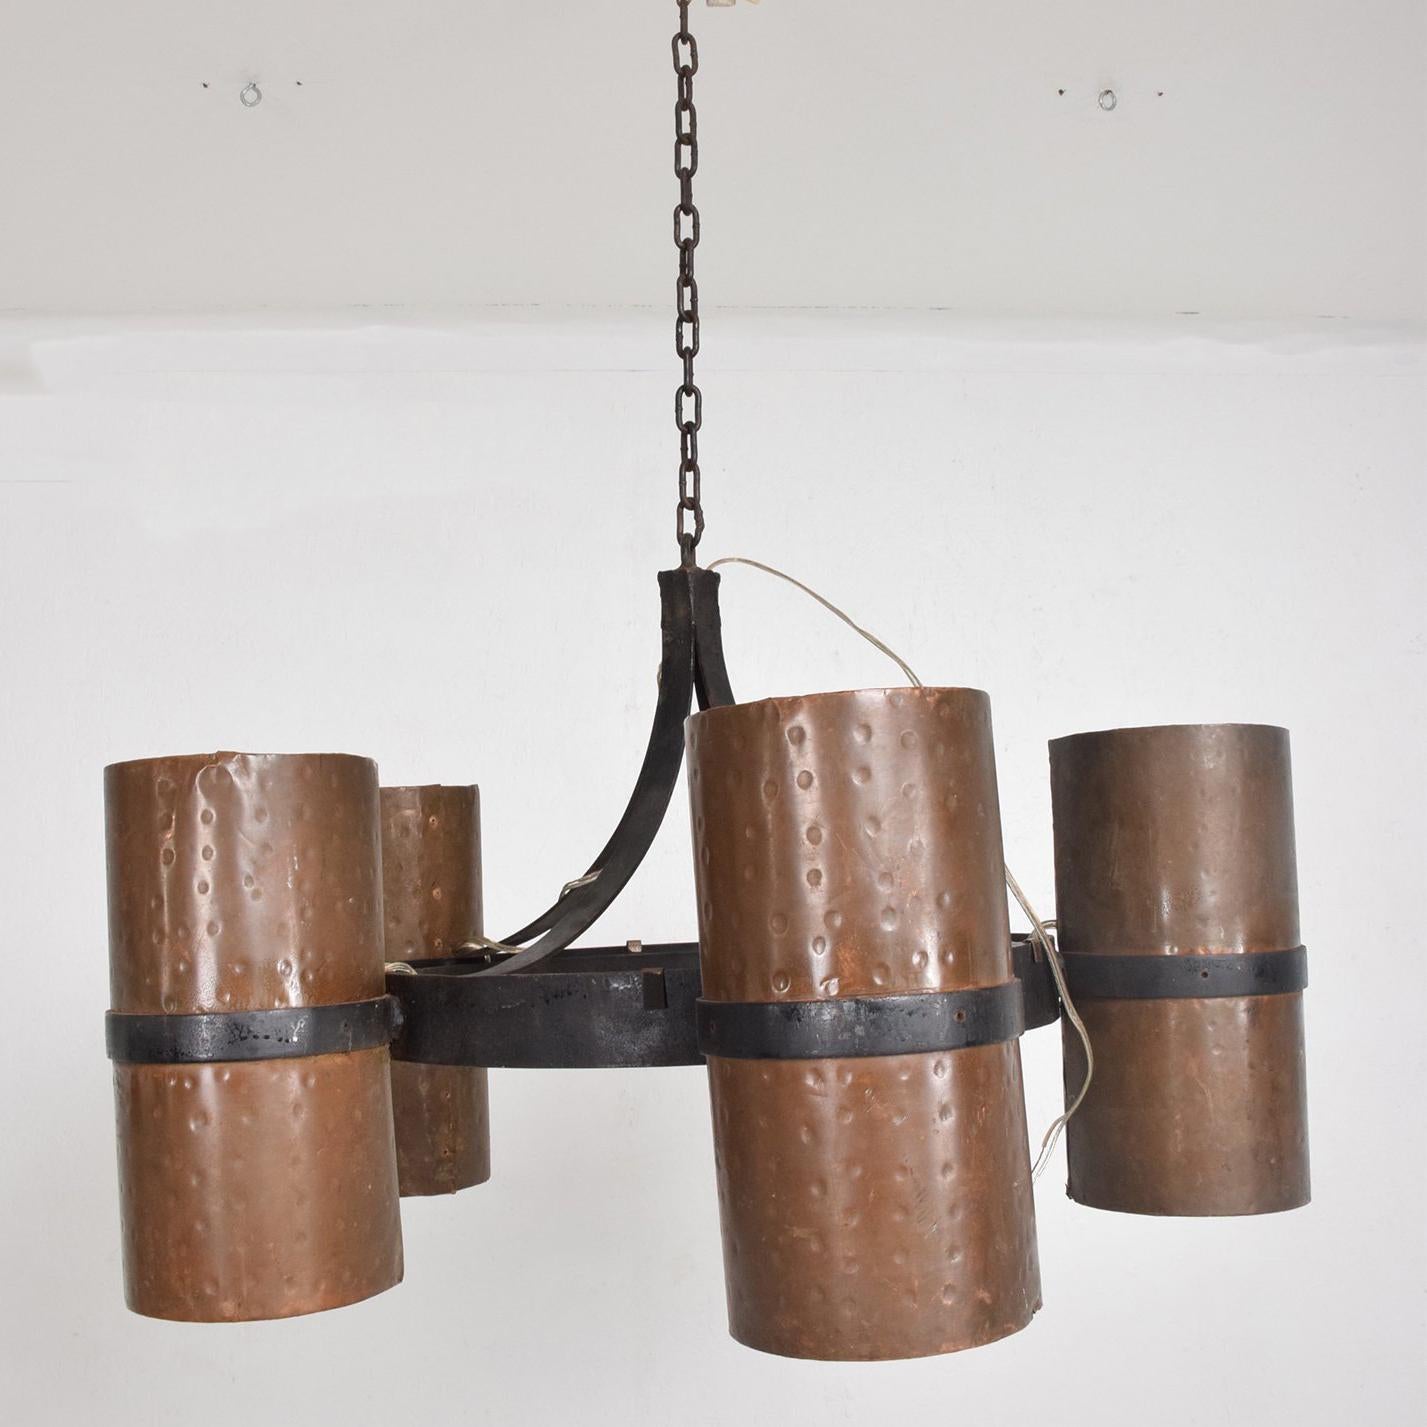 Mexican Pair of Hanging Light Fixtures Iron and Copper, Modernist Brutalist